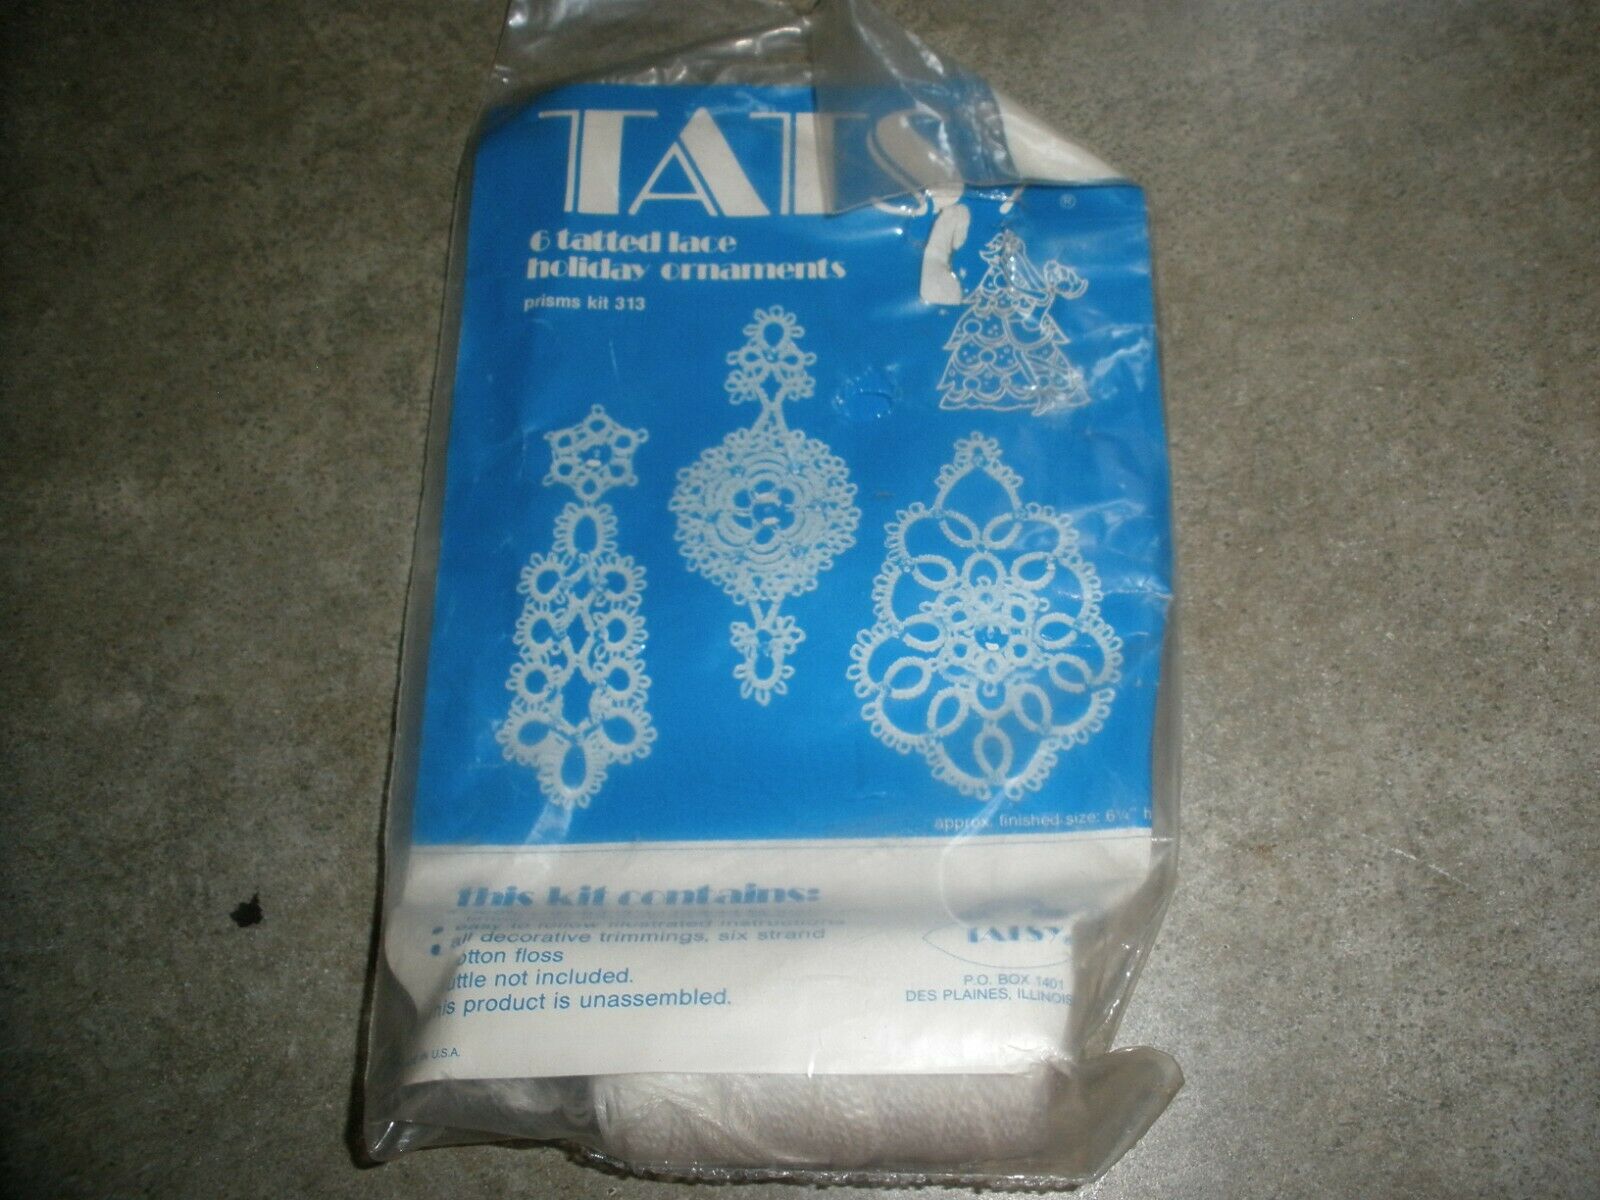 New Tatsy 6 Tatted Lace Holiday Ornaments Prisms Kit 313